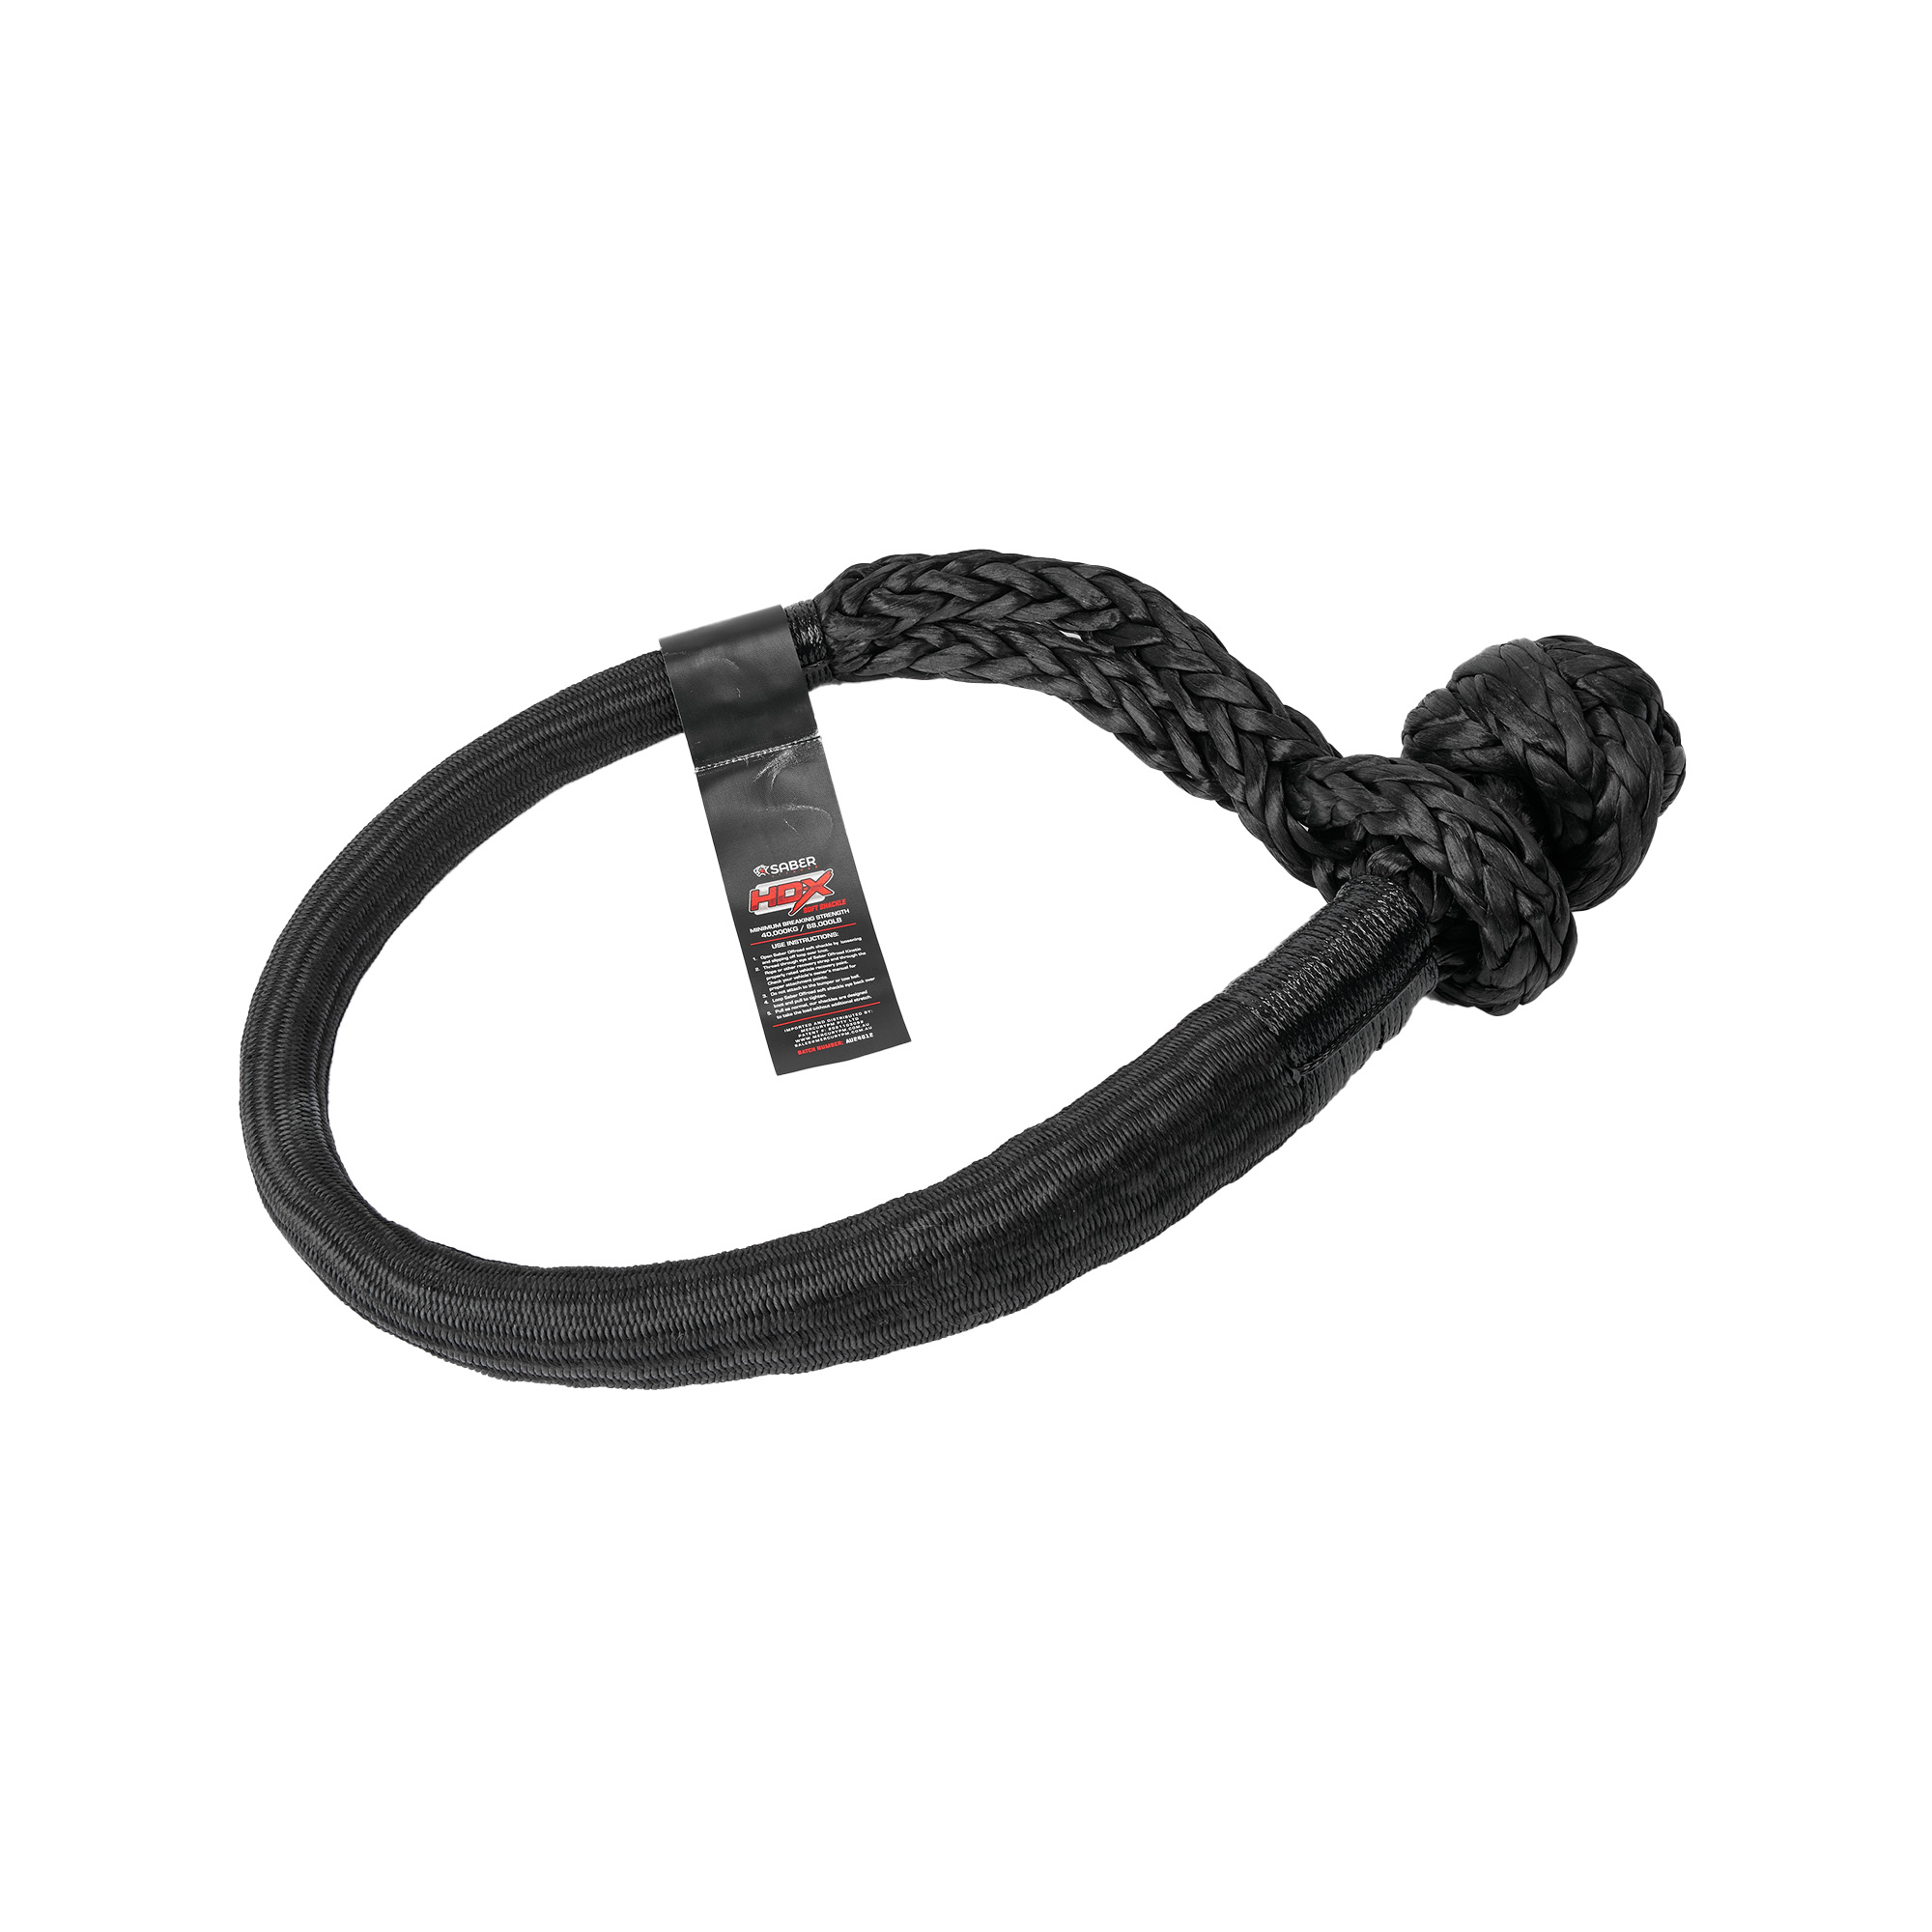 40000KG-HDX-Soft-Shackle-with-Technora-Binding